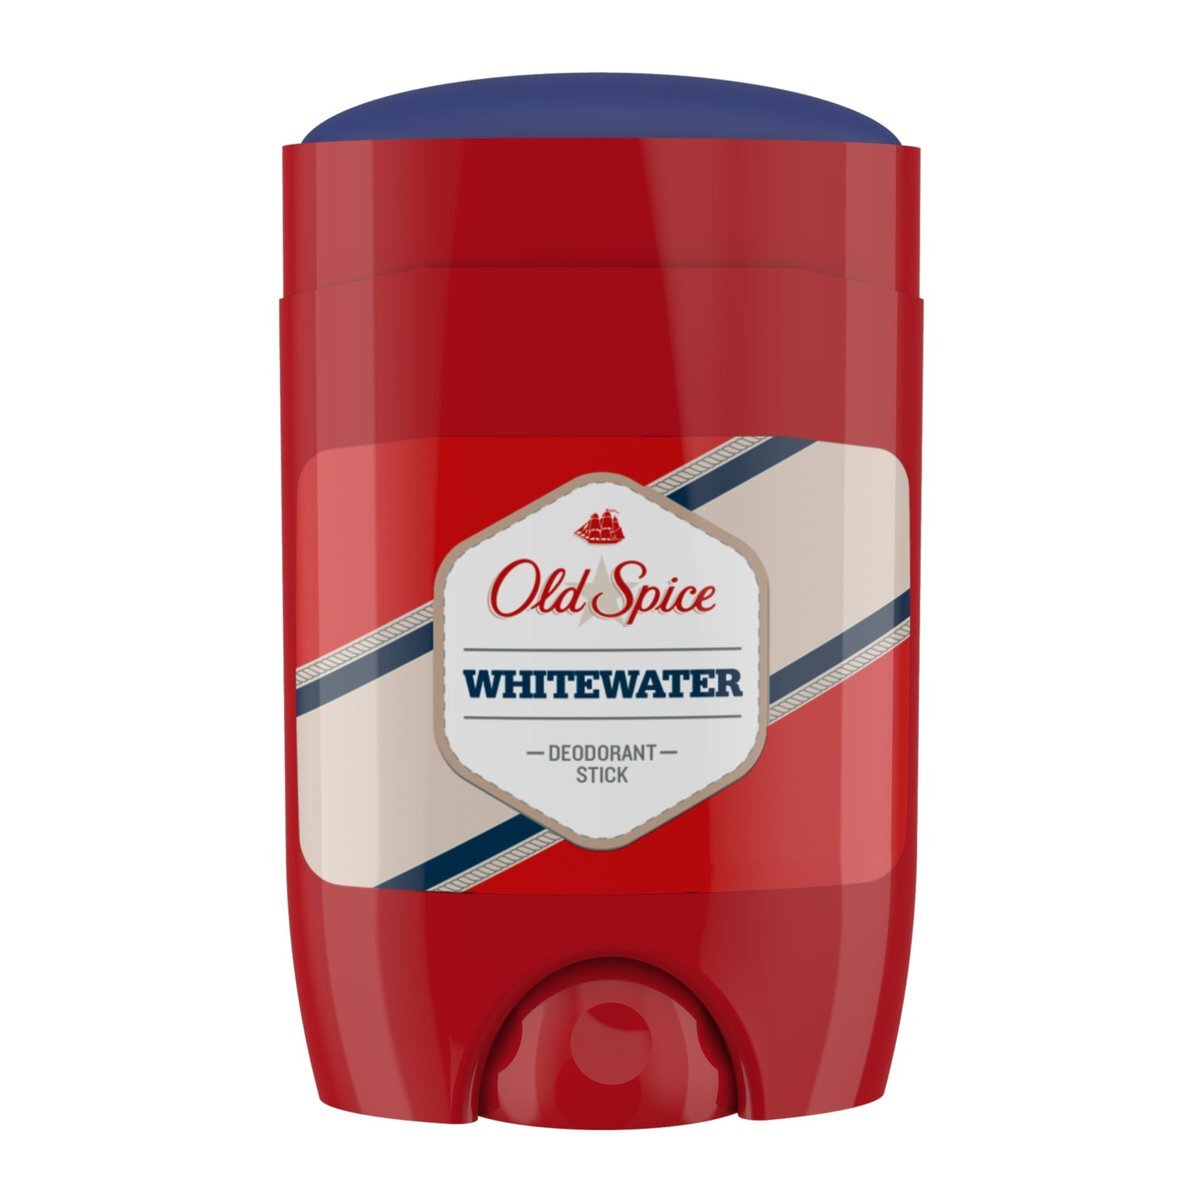 Old Spice Whitewater Stick - 50 ml - Deodorant